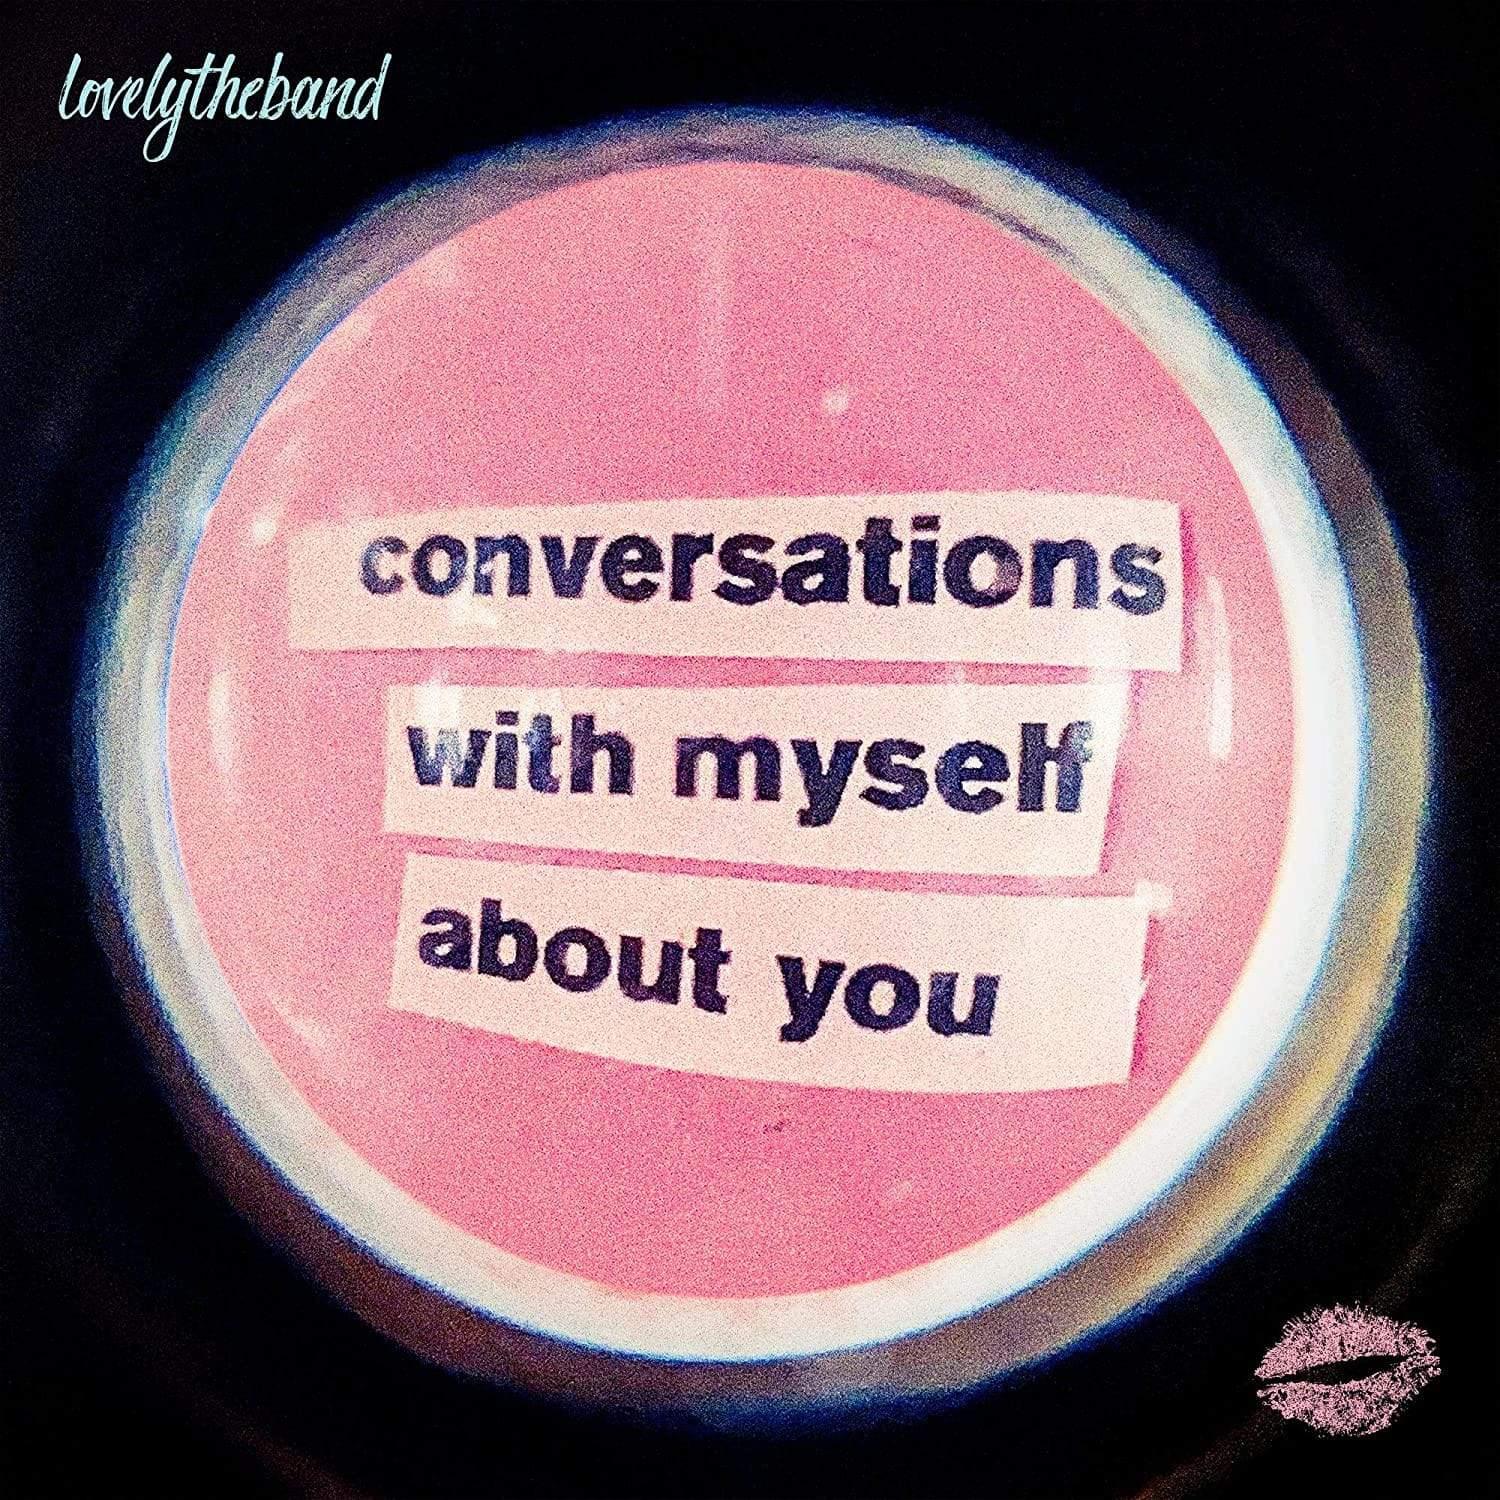 Lovelytheband - Conversations With Myself About You (Vinyl) - Joco Records